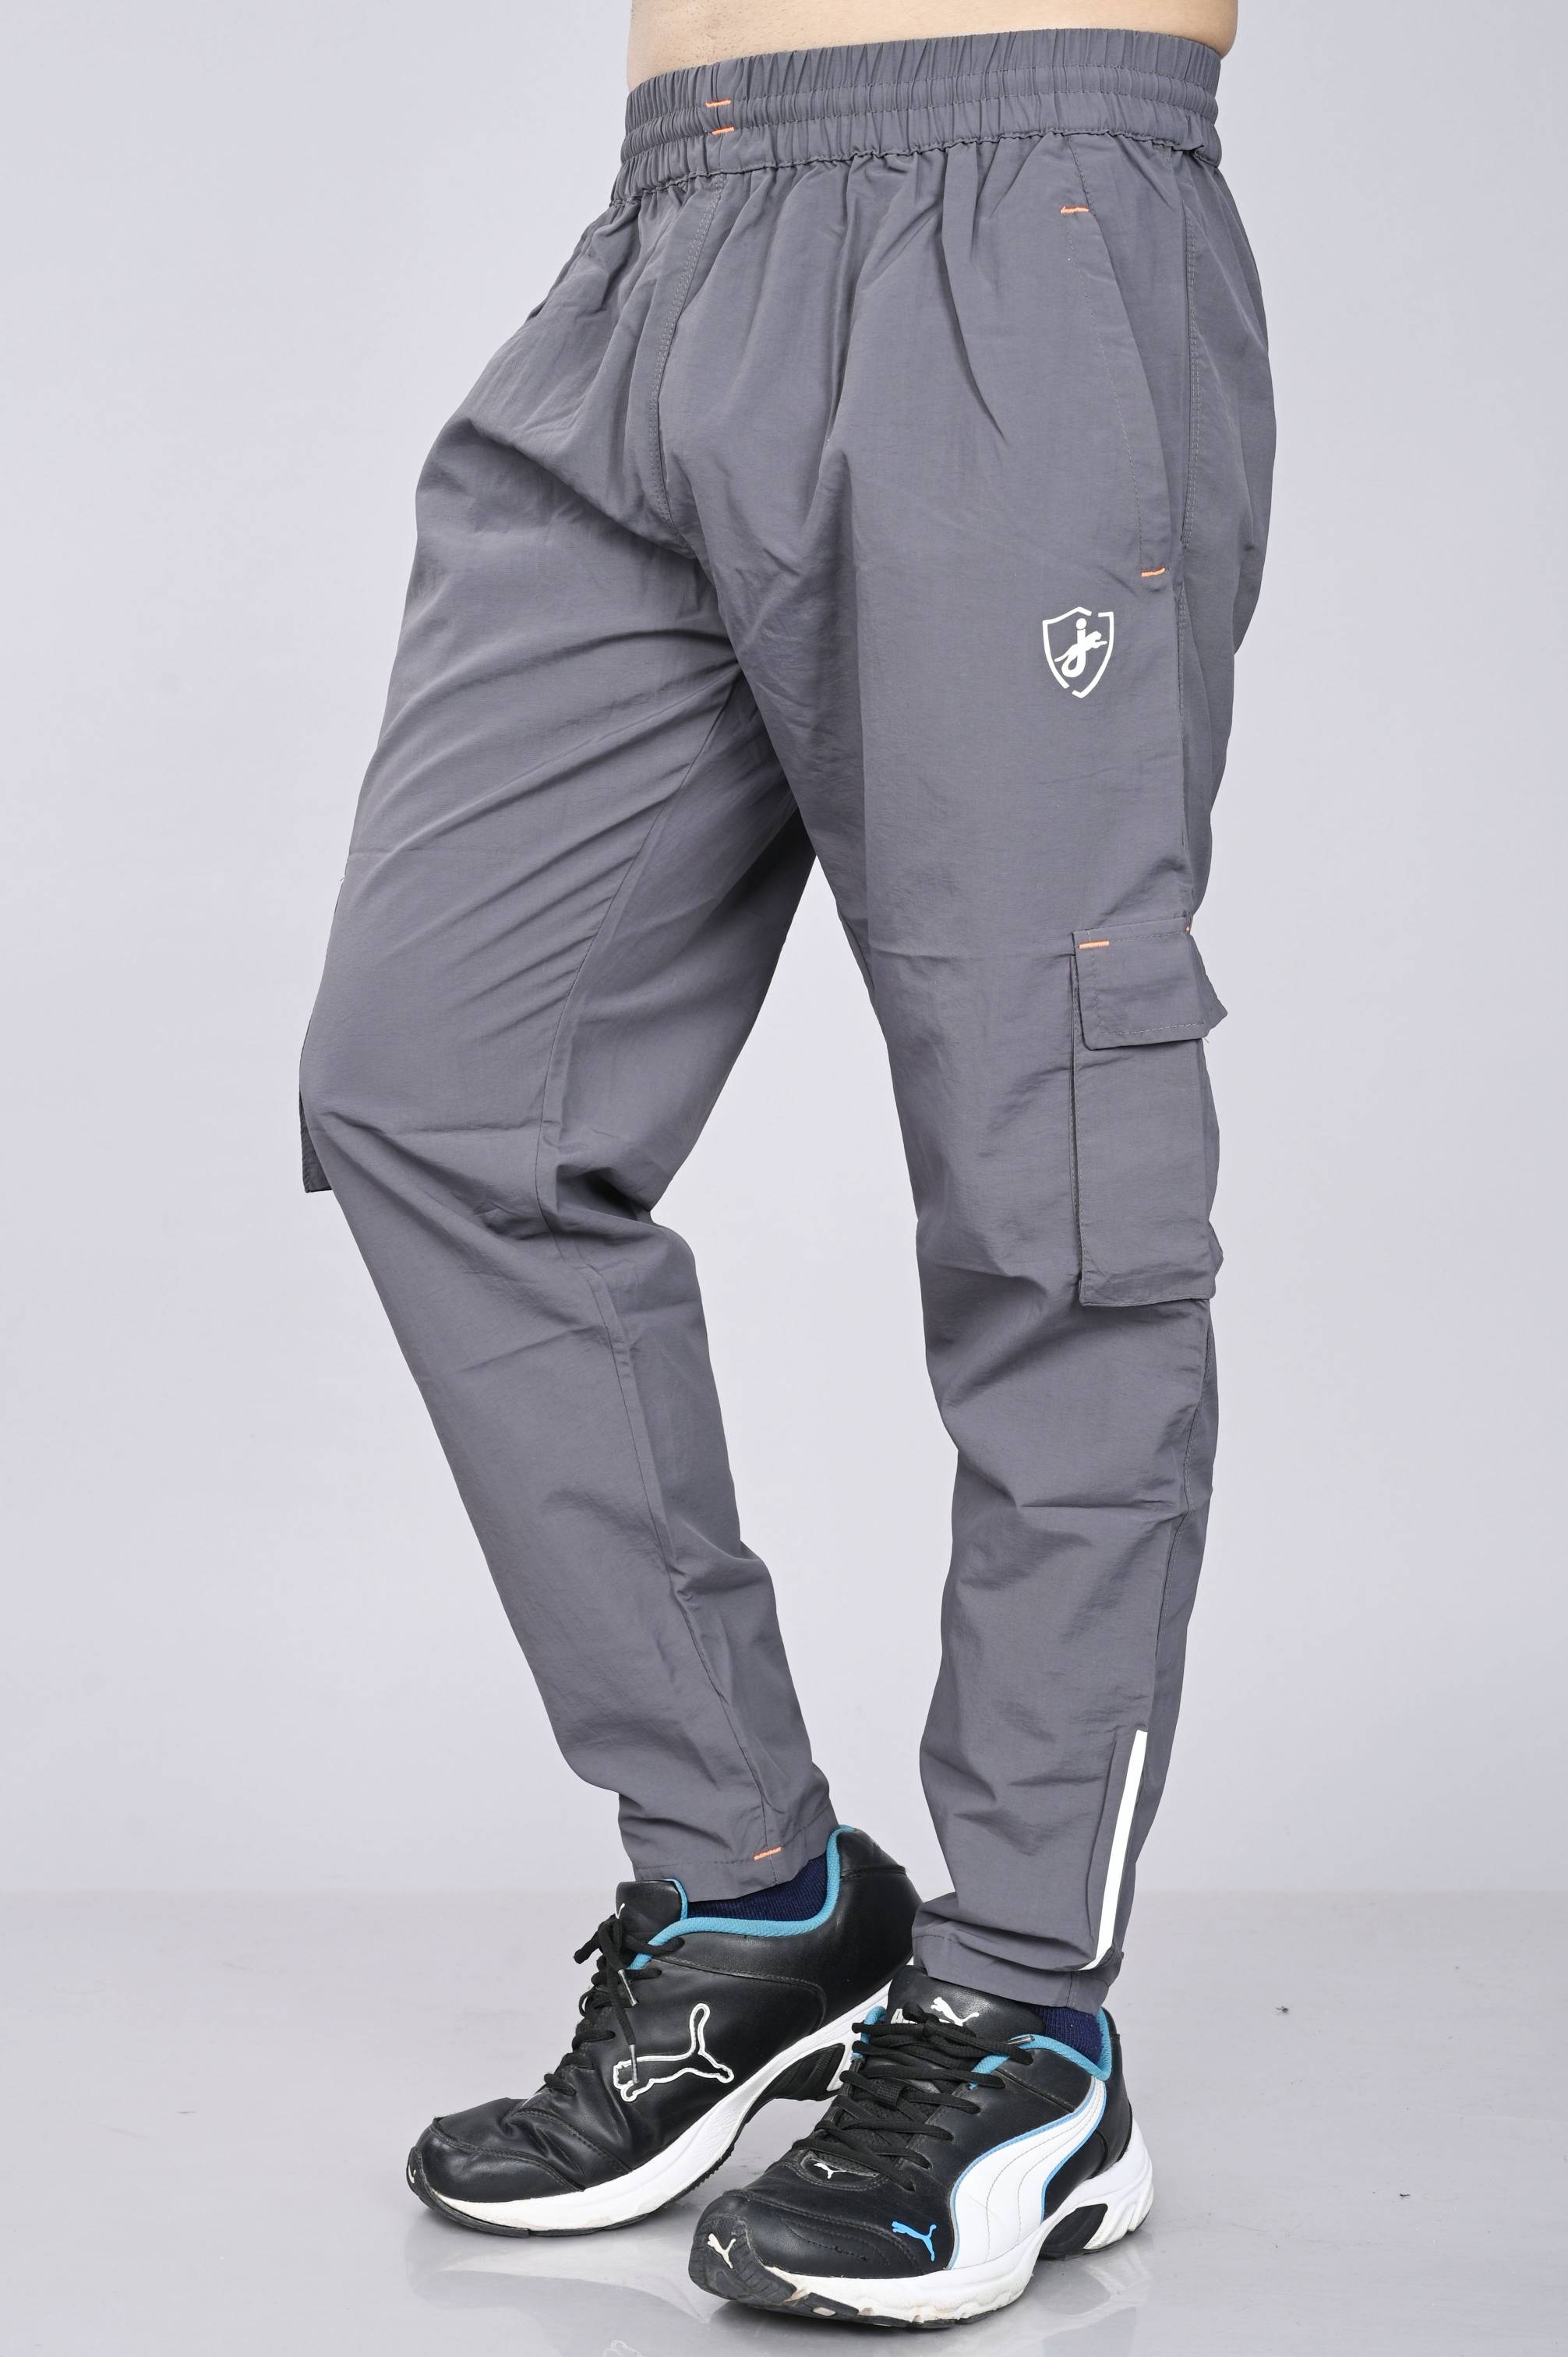 JAGURO | Men's Polyester Stylish Slim fit Solid Cargo Track pant